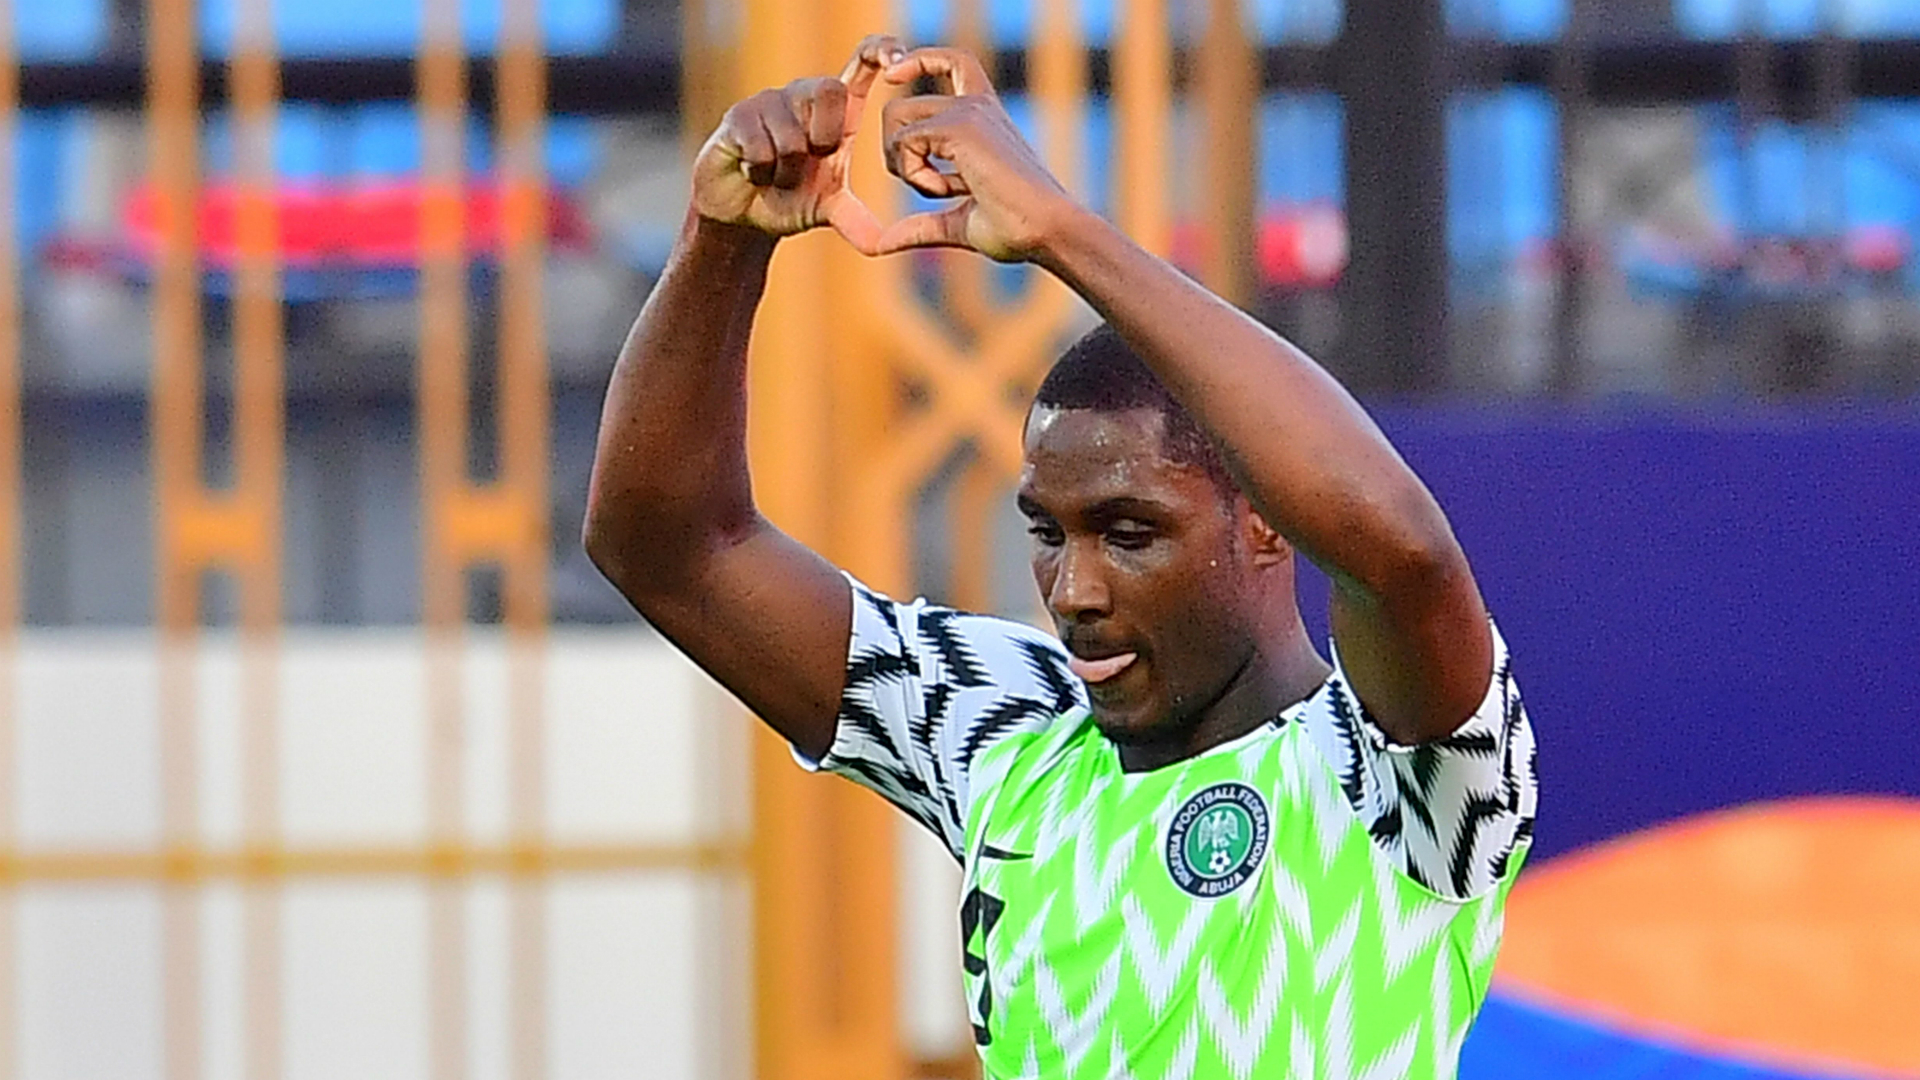 Afcon 2019: I am not bothered to be top scorer - Nigeria's Ighalo